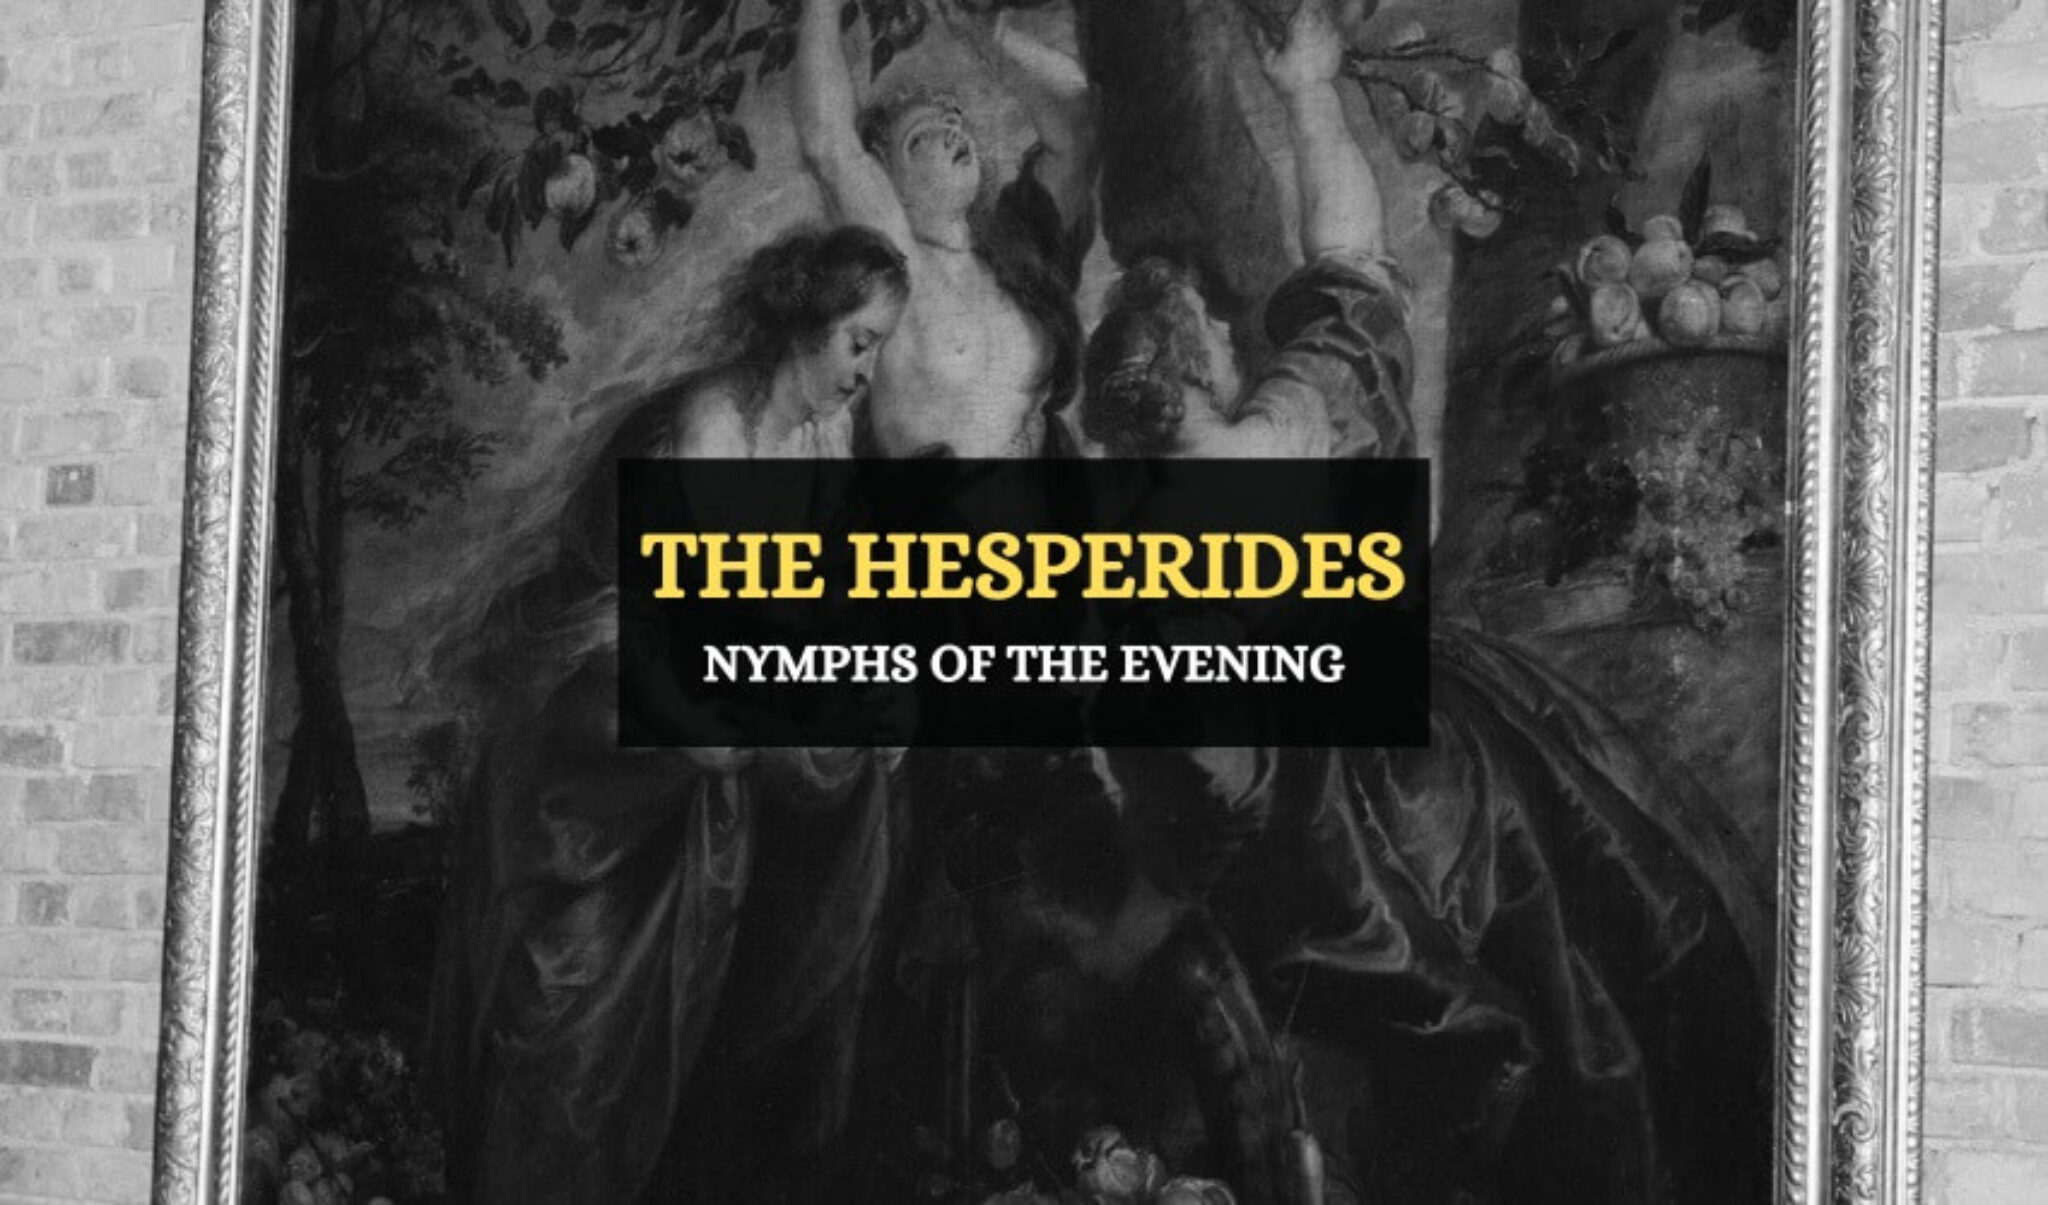 who was hesperides